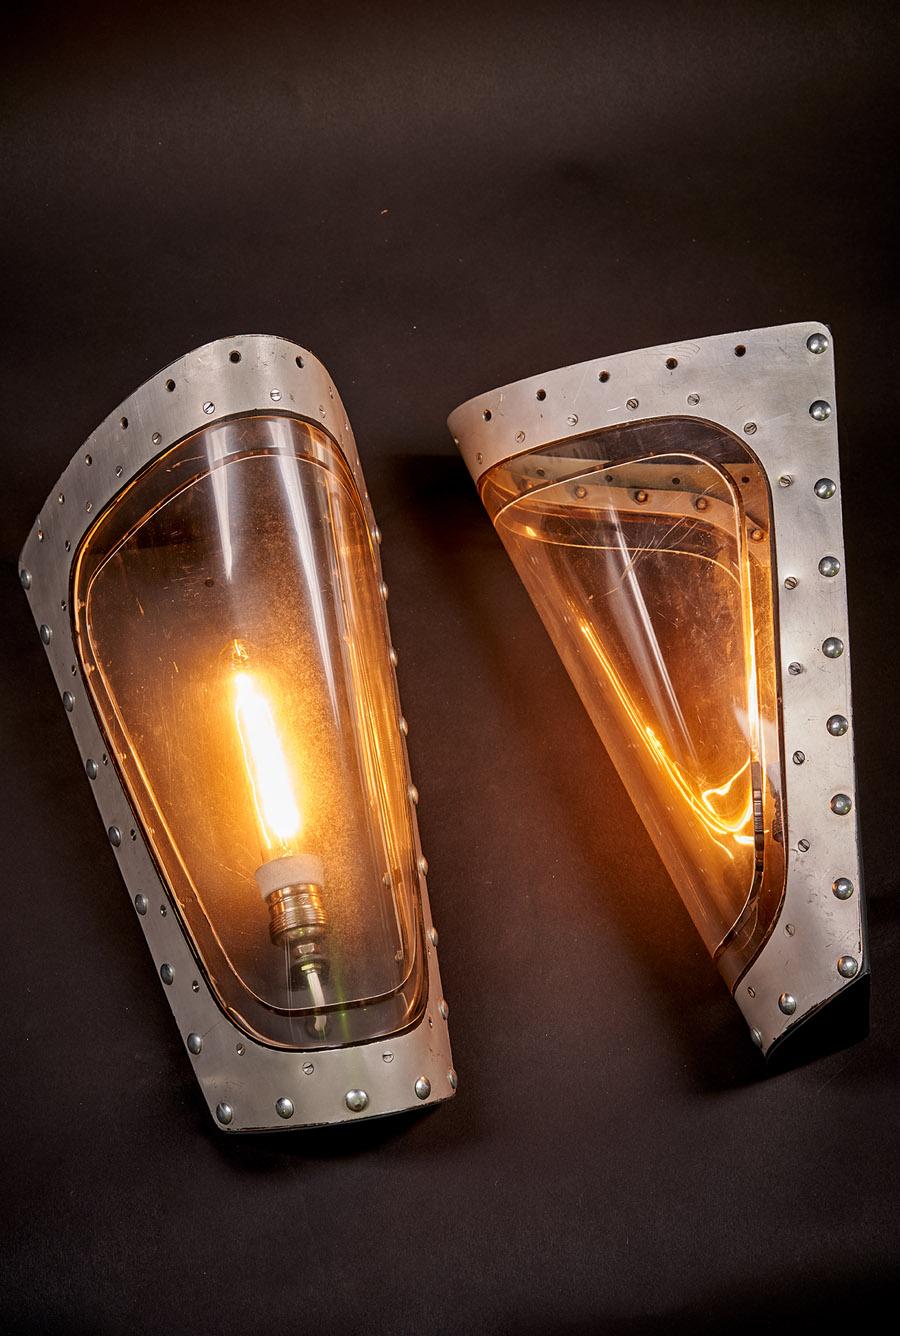 Wall lamp made from the exterior lighting of the military aircraft from the 1990s.
Construction:
Anodised aerial aluminium combined with thick profiled plexiglass. The casing and inner frame
have original signatures. Rear wall with light source